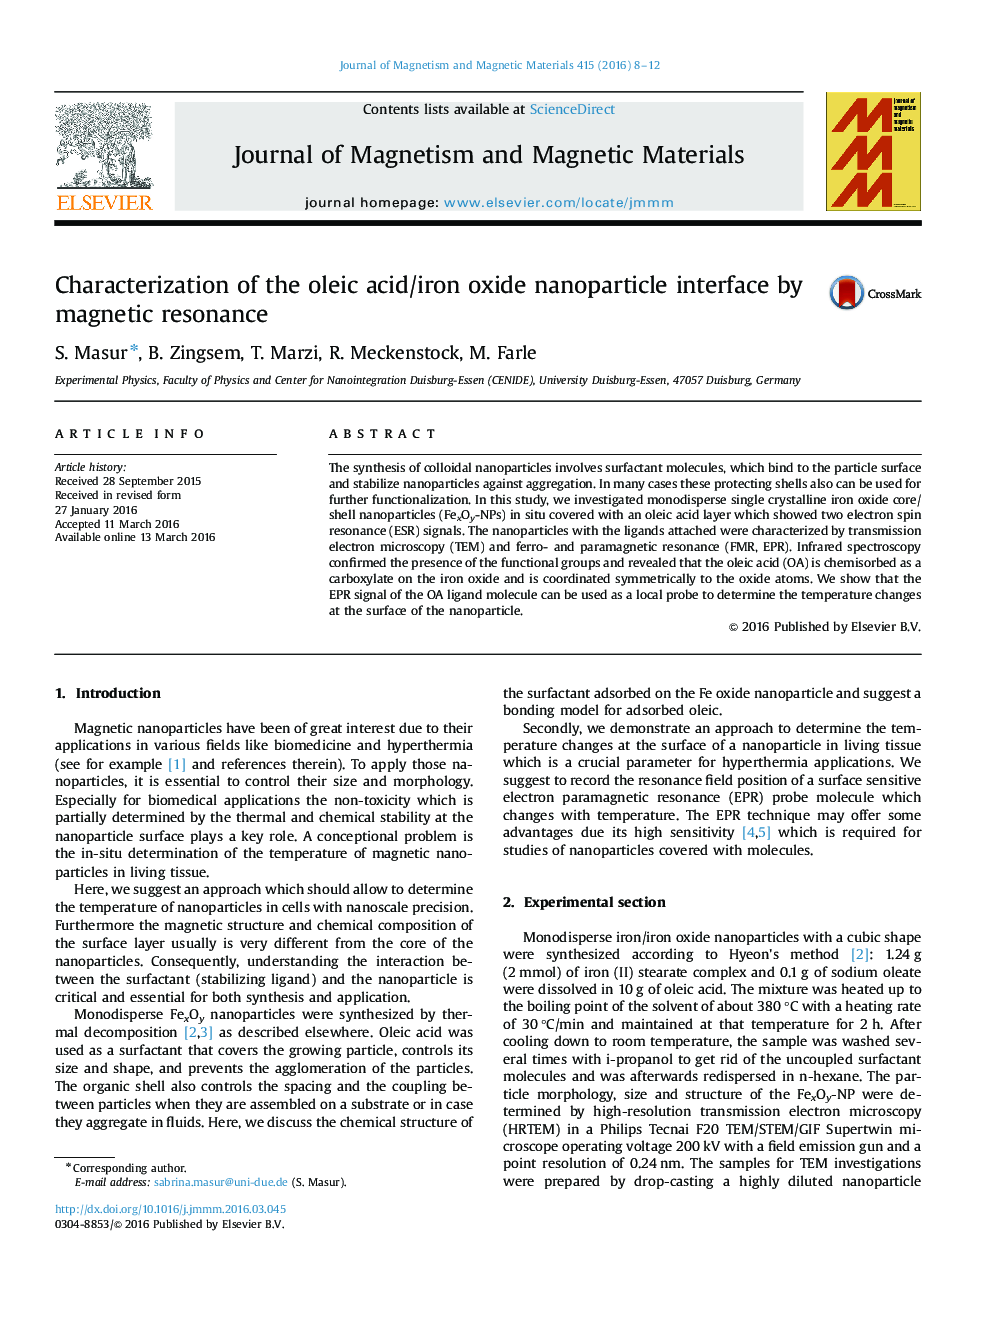 Characterization of the oleic acid/iron oxide nanoparticle interface by magnetic resonance